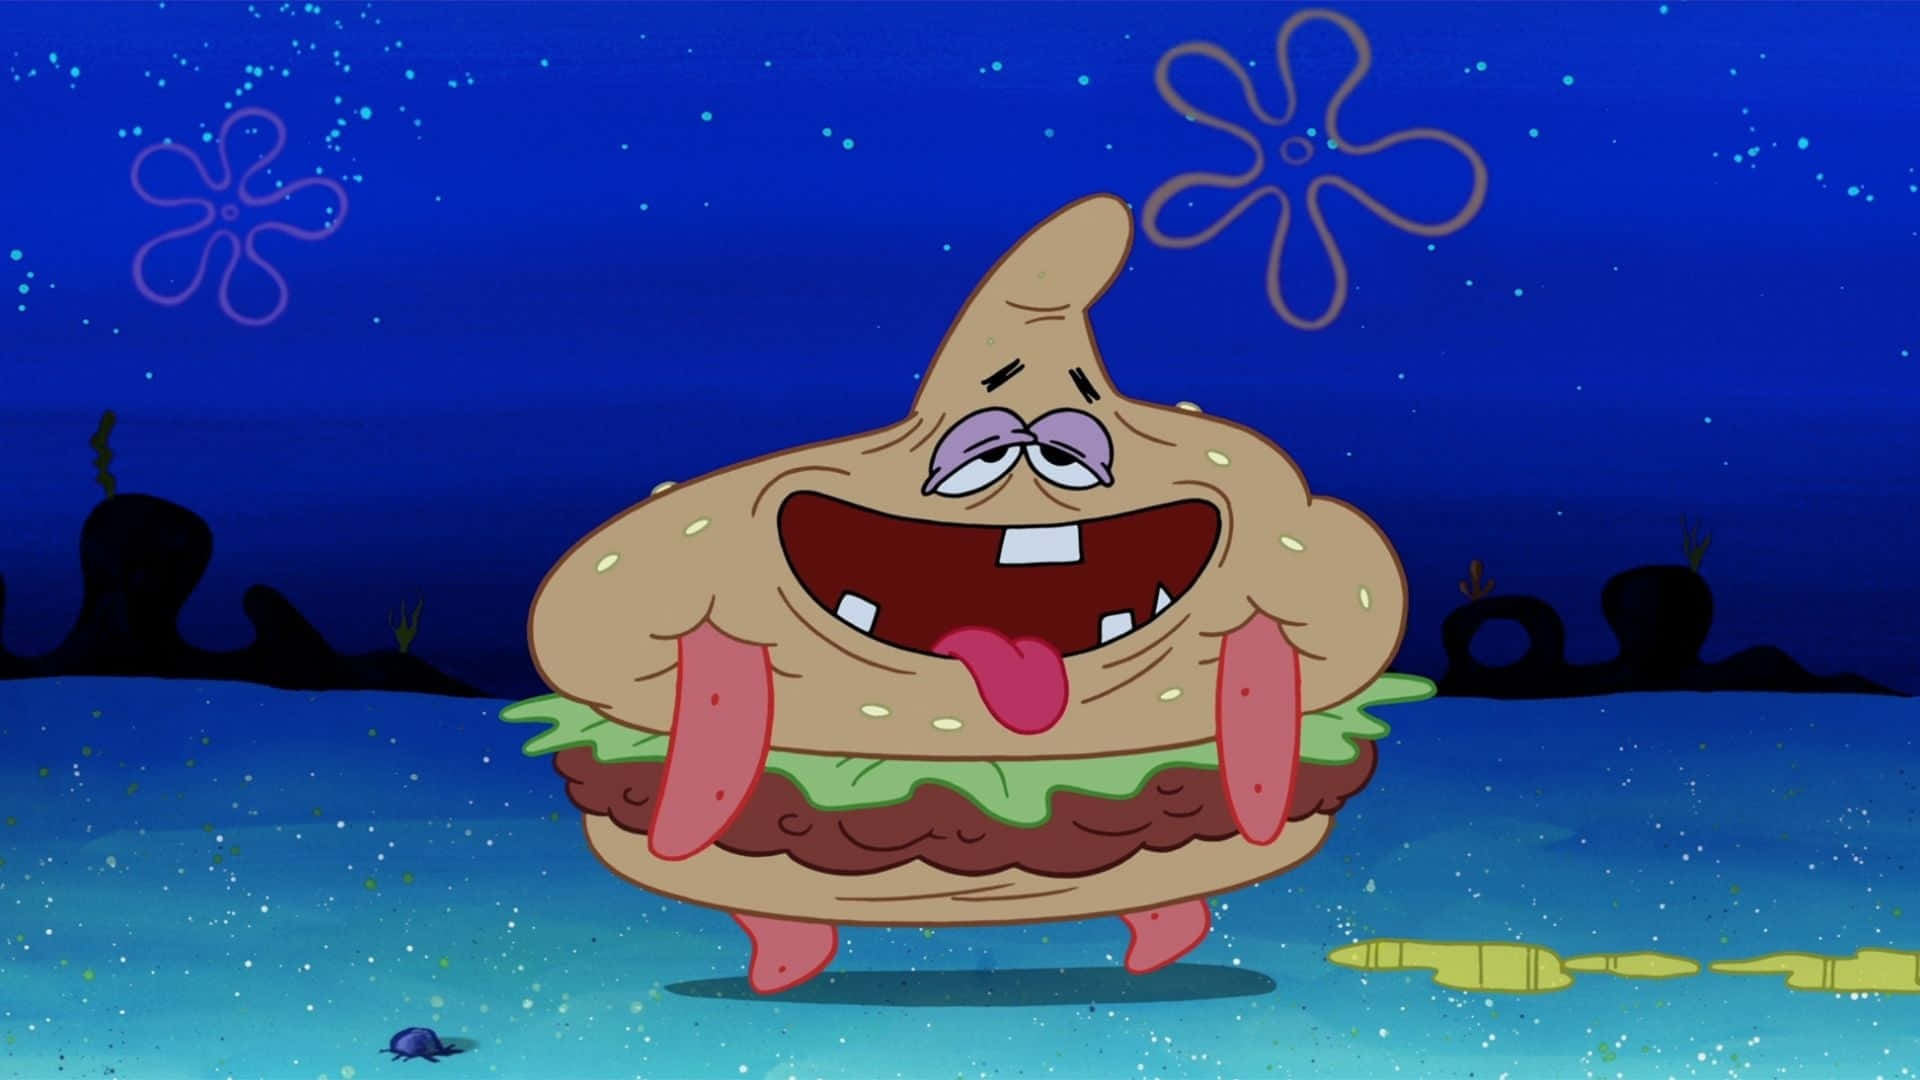 Delicious and Scrumptious Krabby Patty Wallpaper